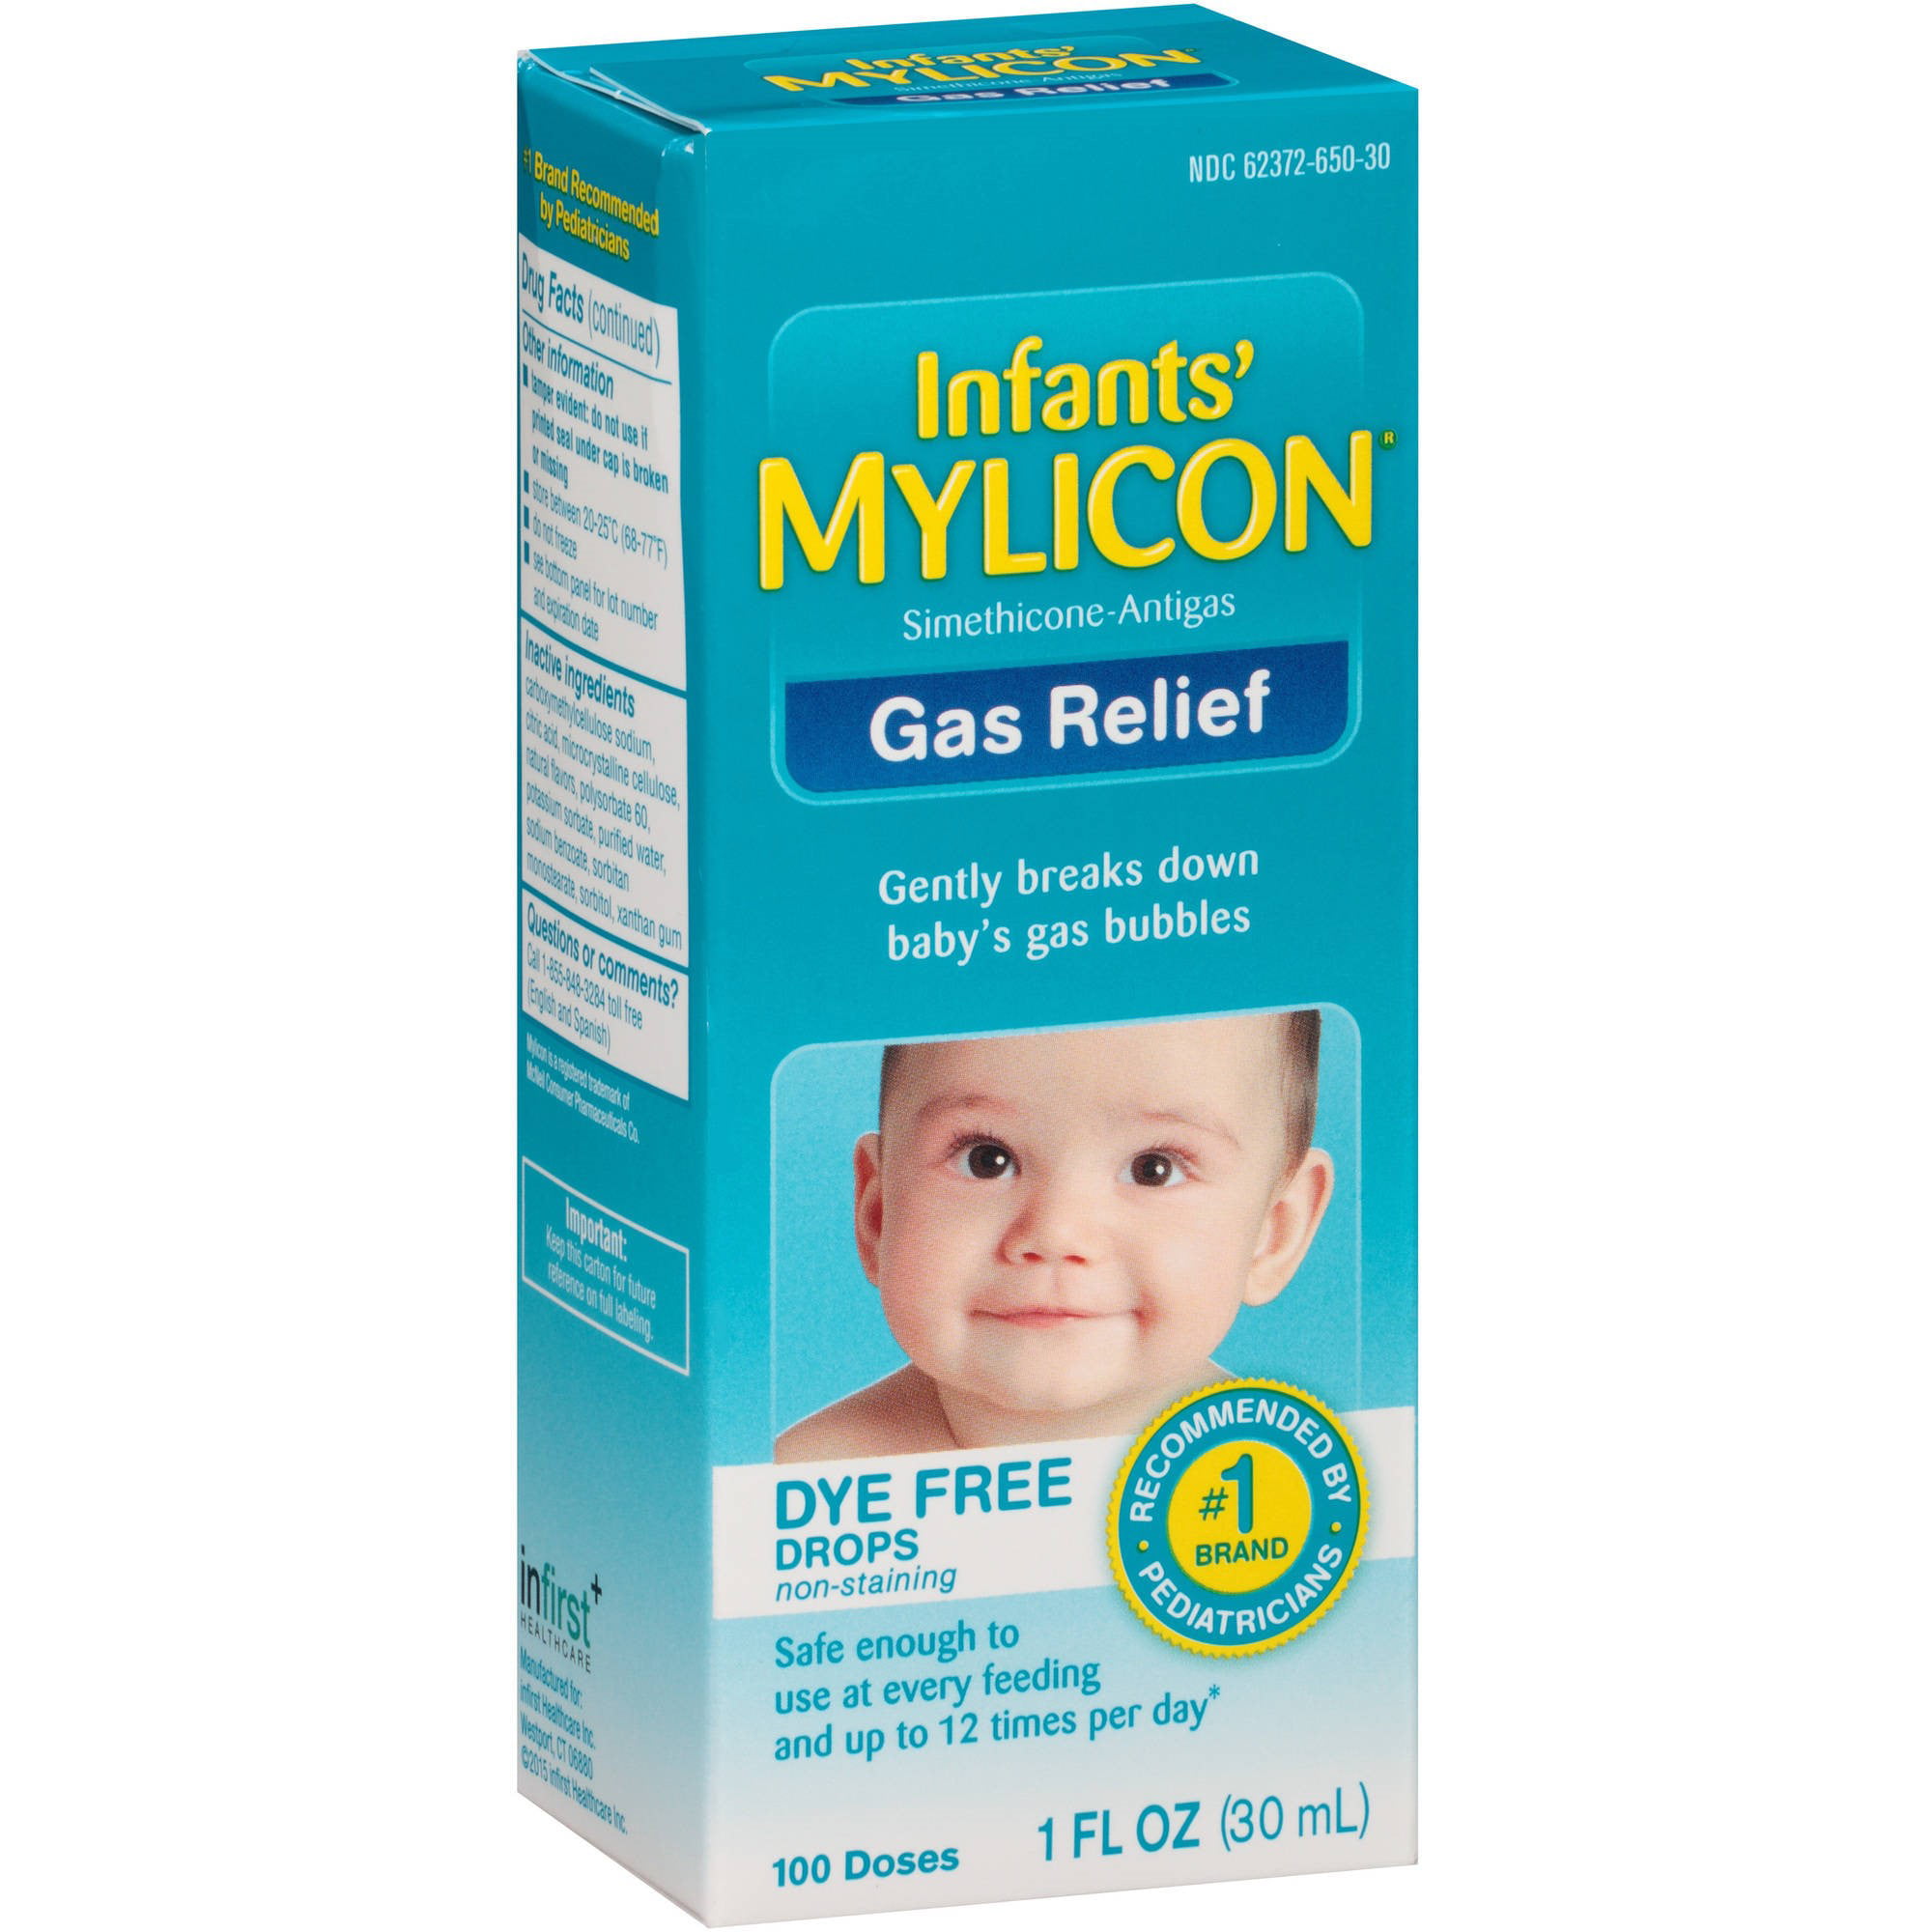 Mylicon Infants' Dye Free Gas Relief 